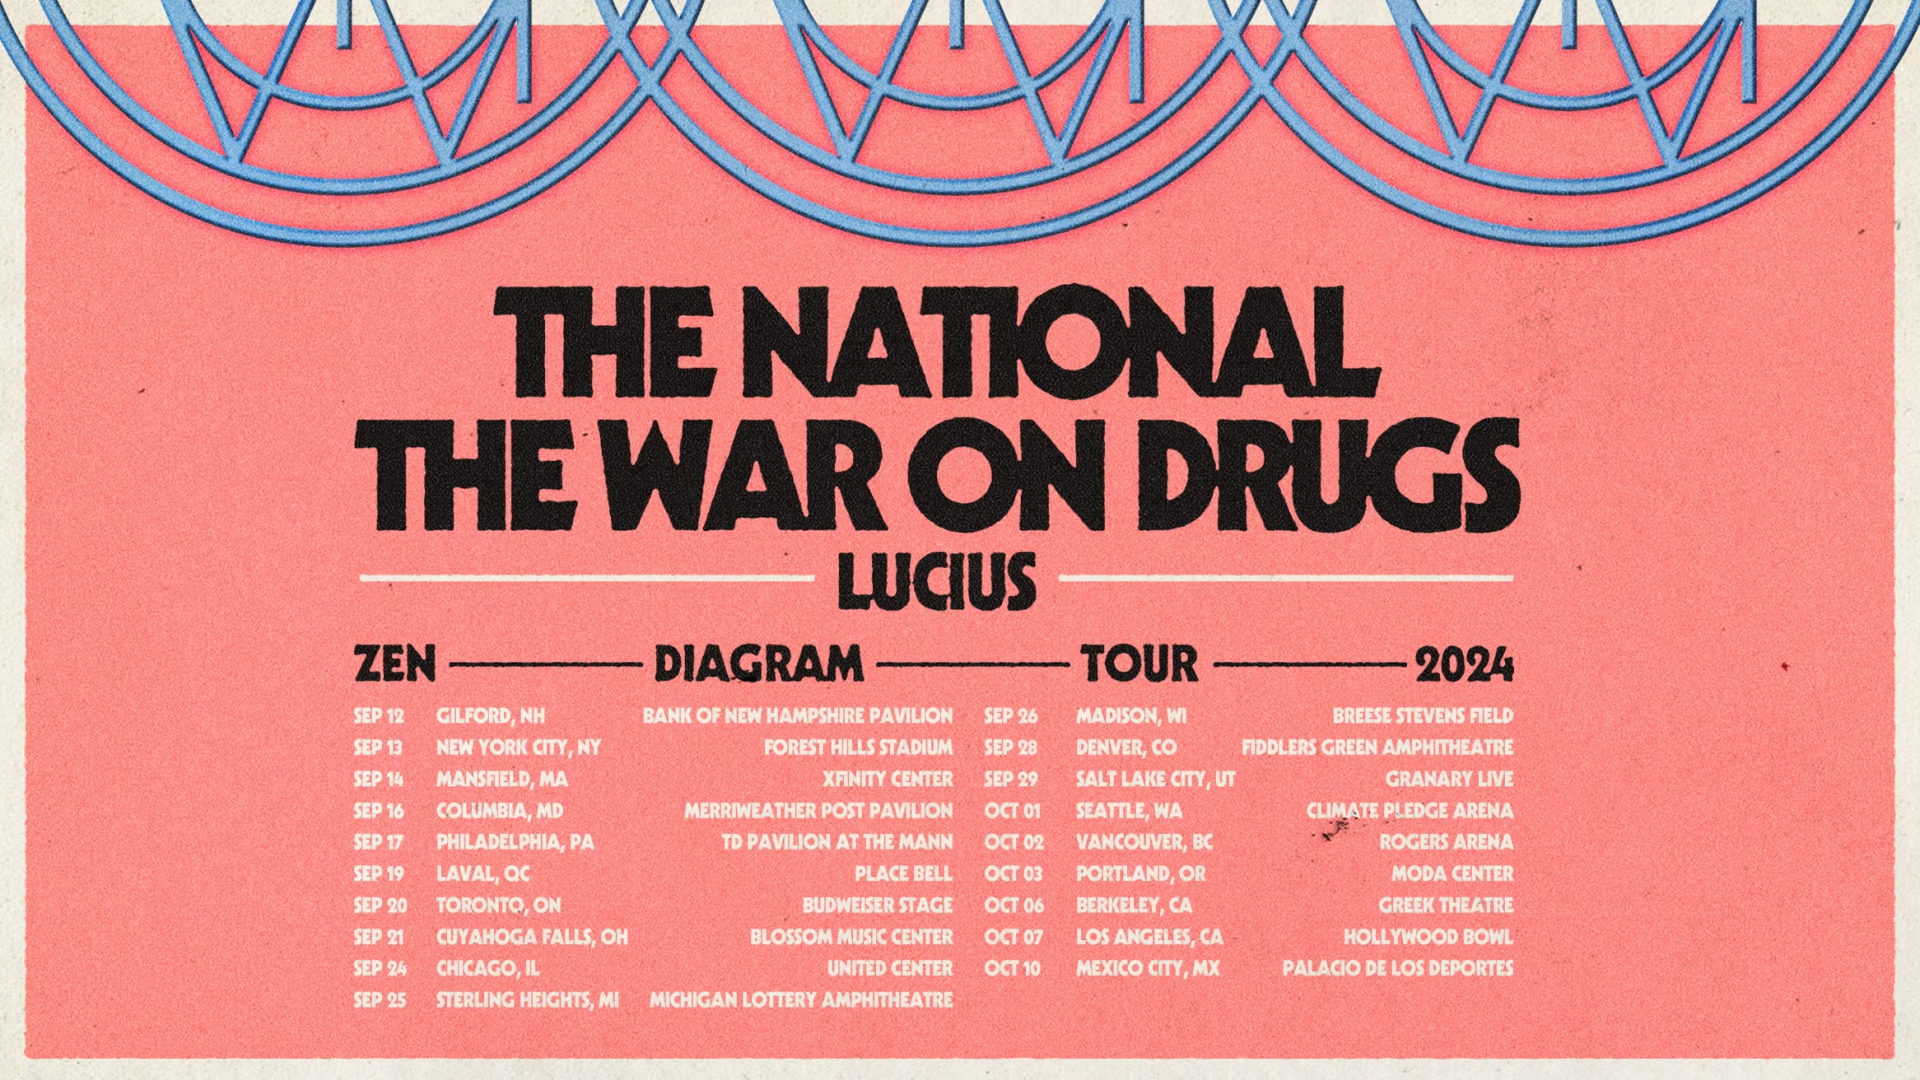 The National - The War On Drugs - Lucius en Xfinity Center Tickets